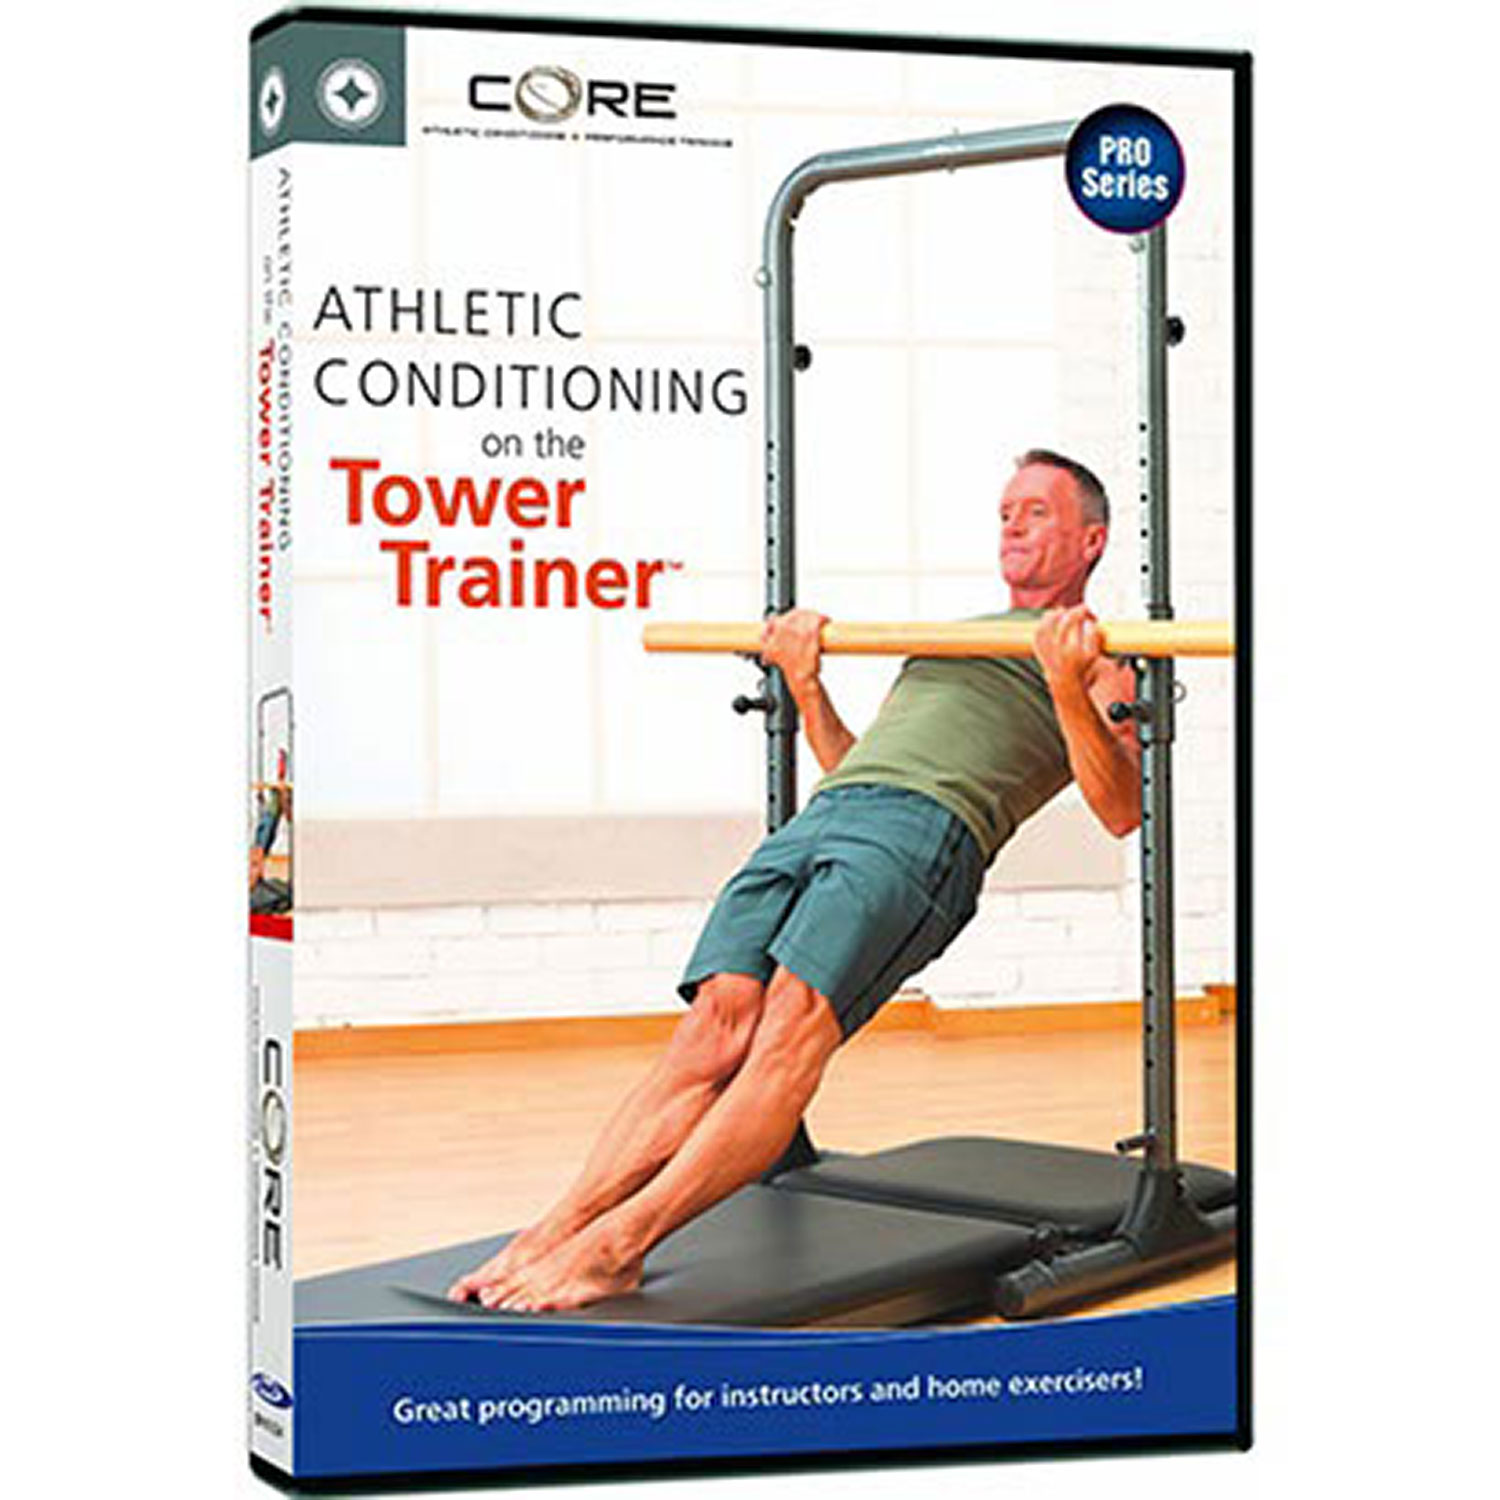 Athletic Conditioning on the Tower Trainer